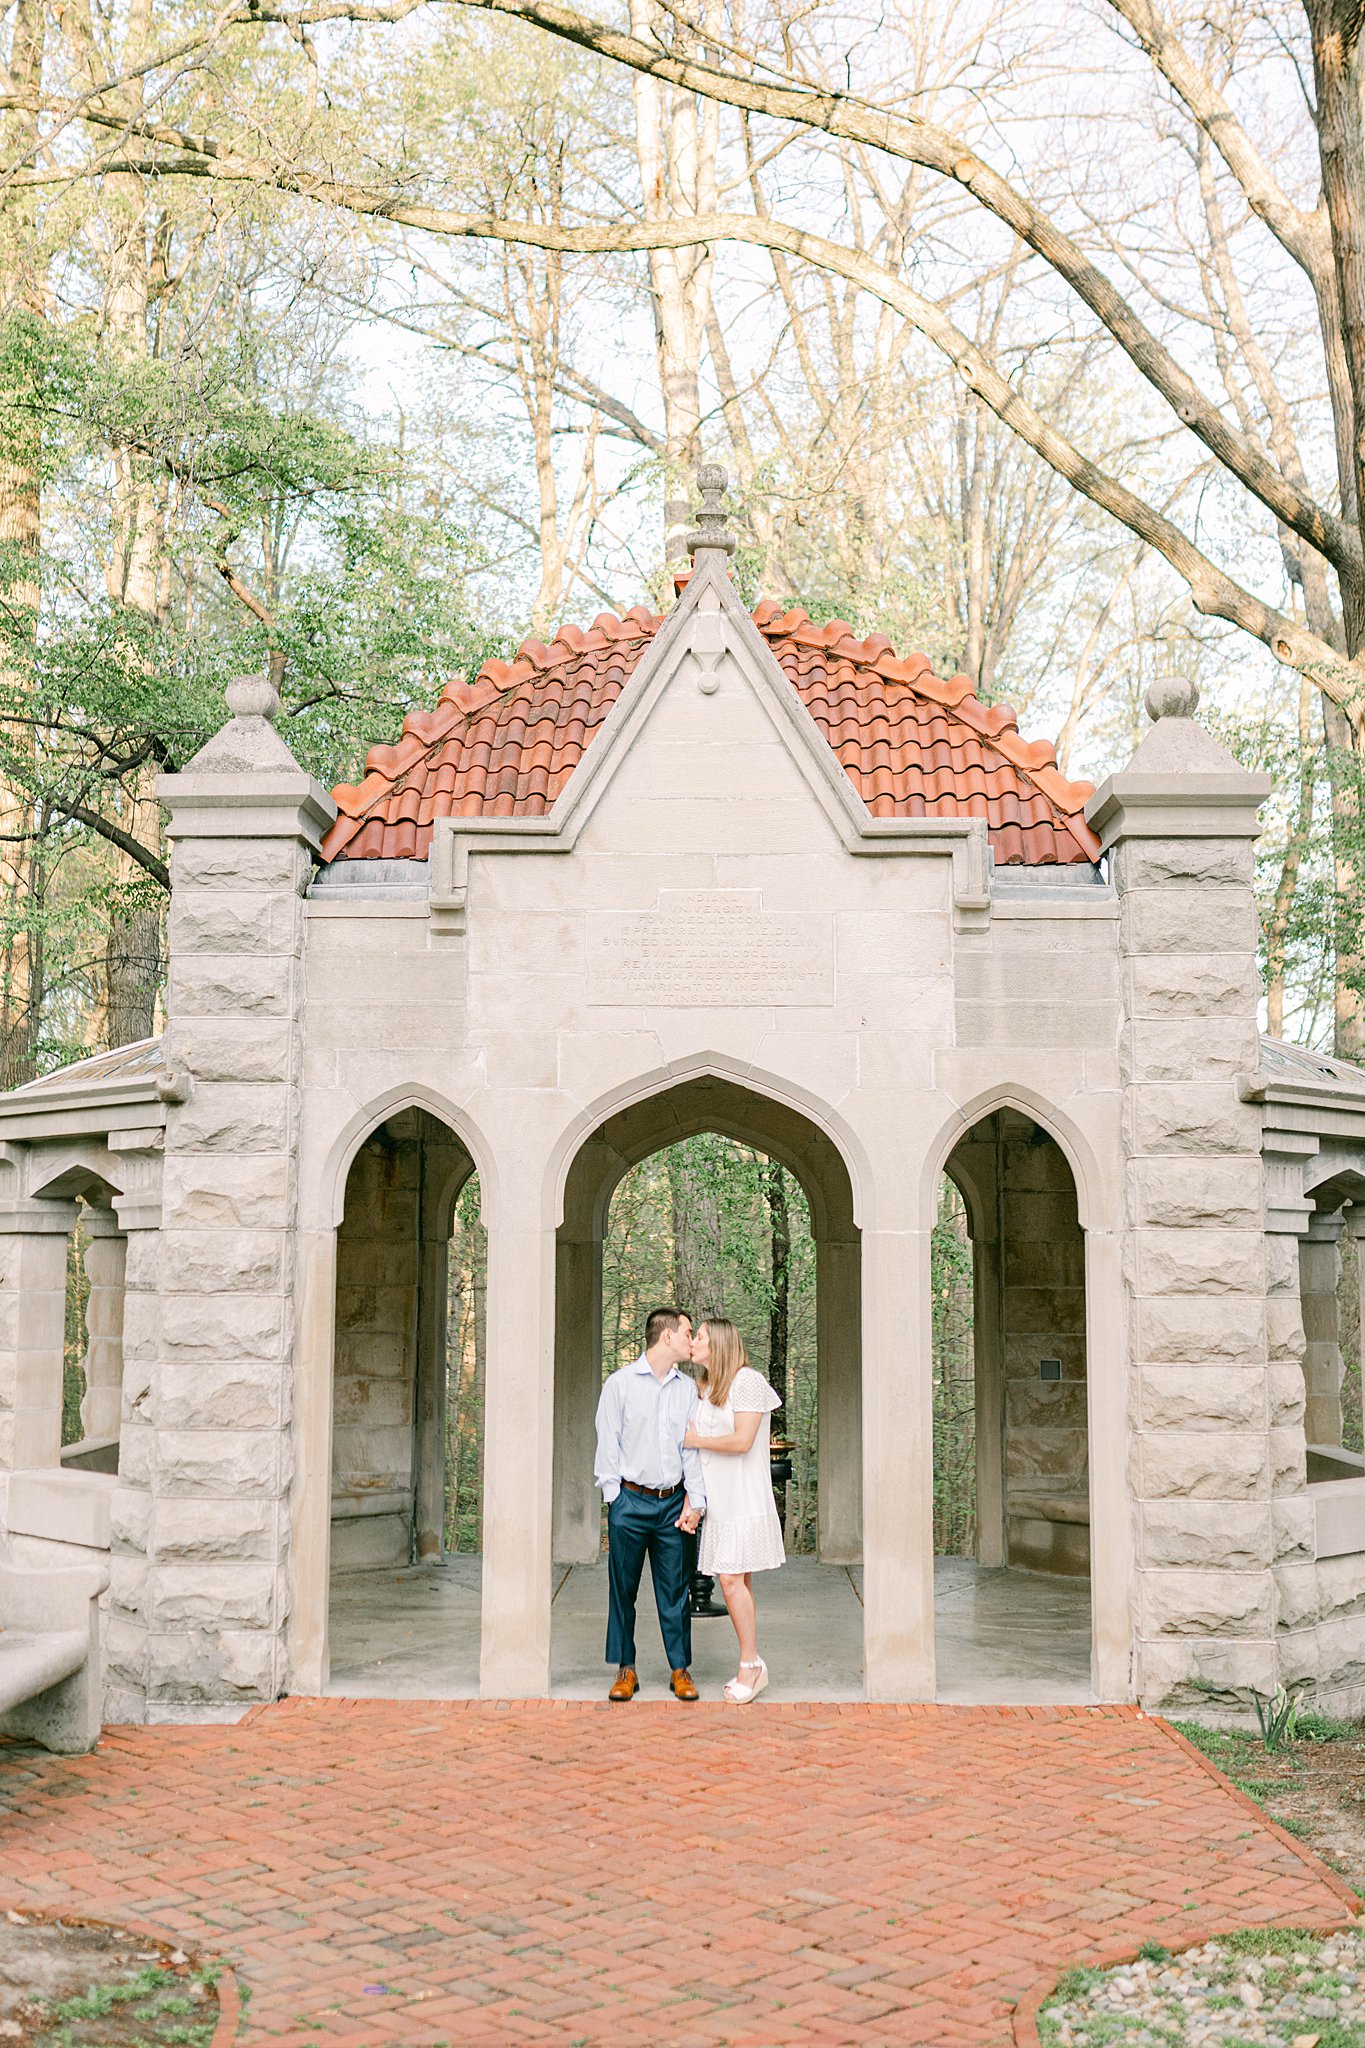 Couple shares a kiss at the well on the Indiana University Campus during their spring Indiana University campus in Bloomington, Indiana.